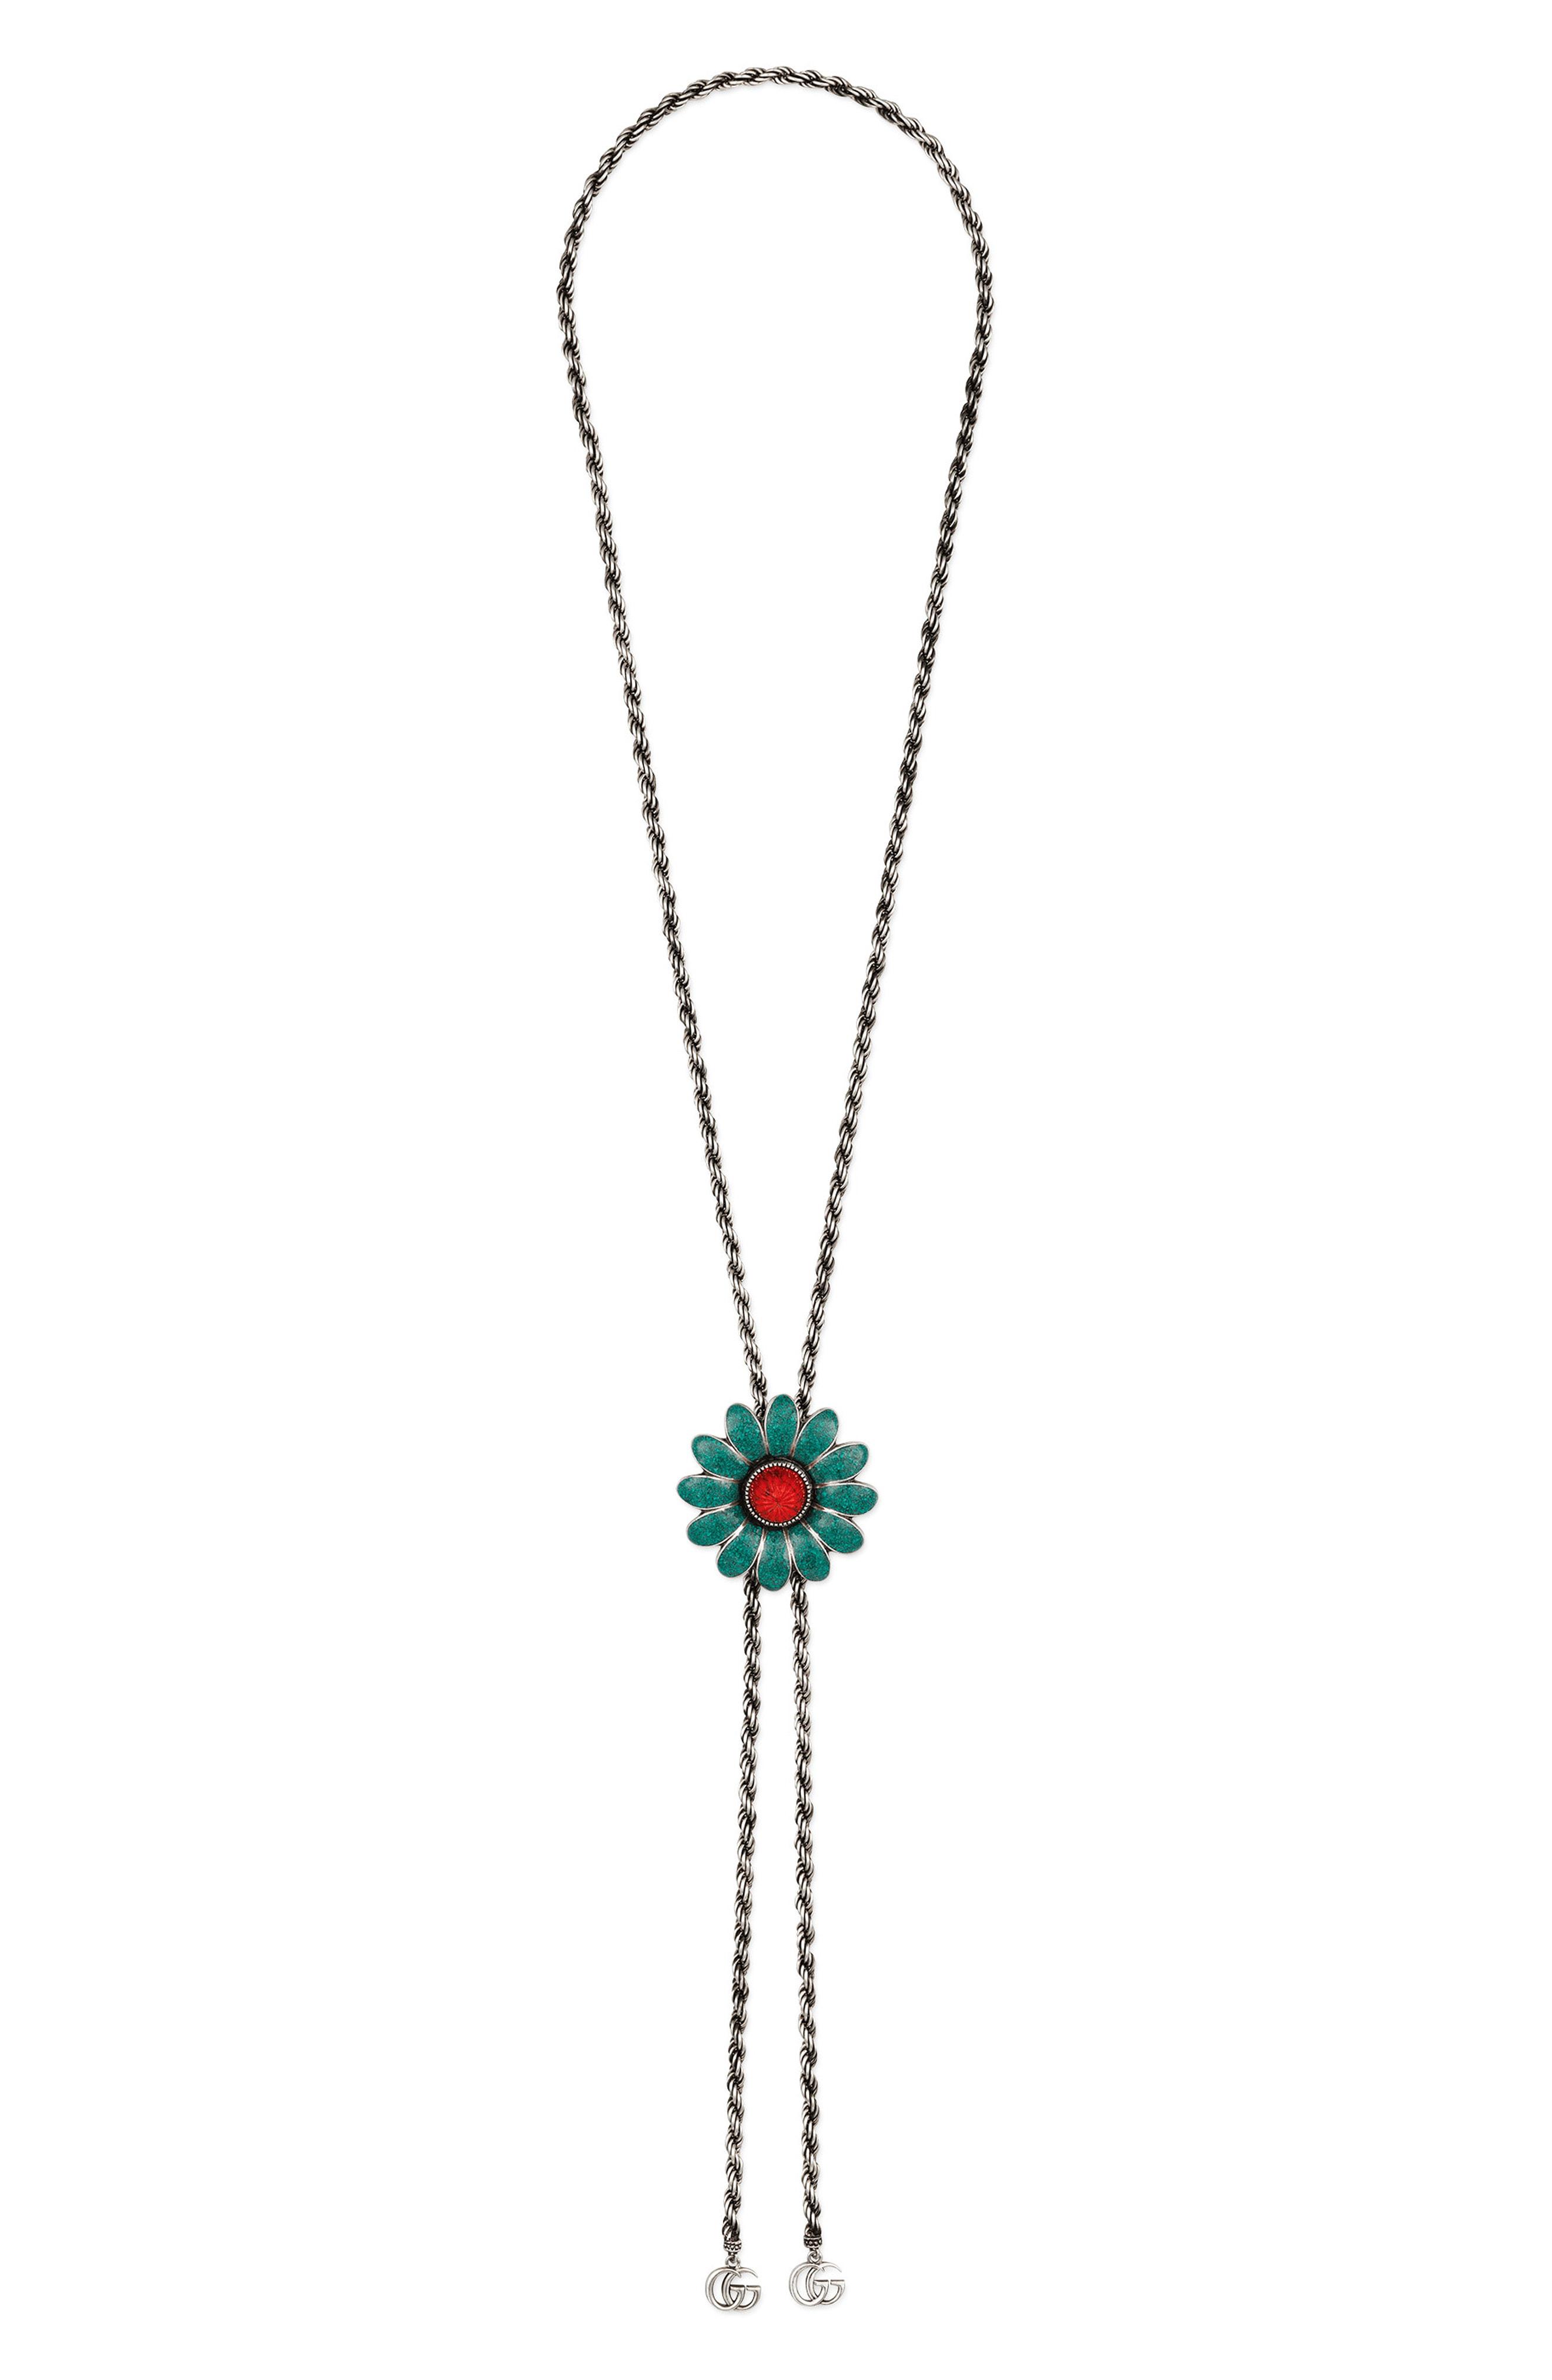 Lyst - Gucci Gg Marmont Bolo Necklace in Metallic